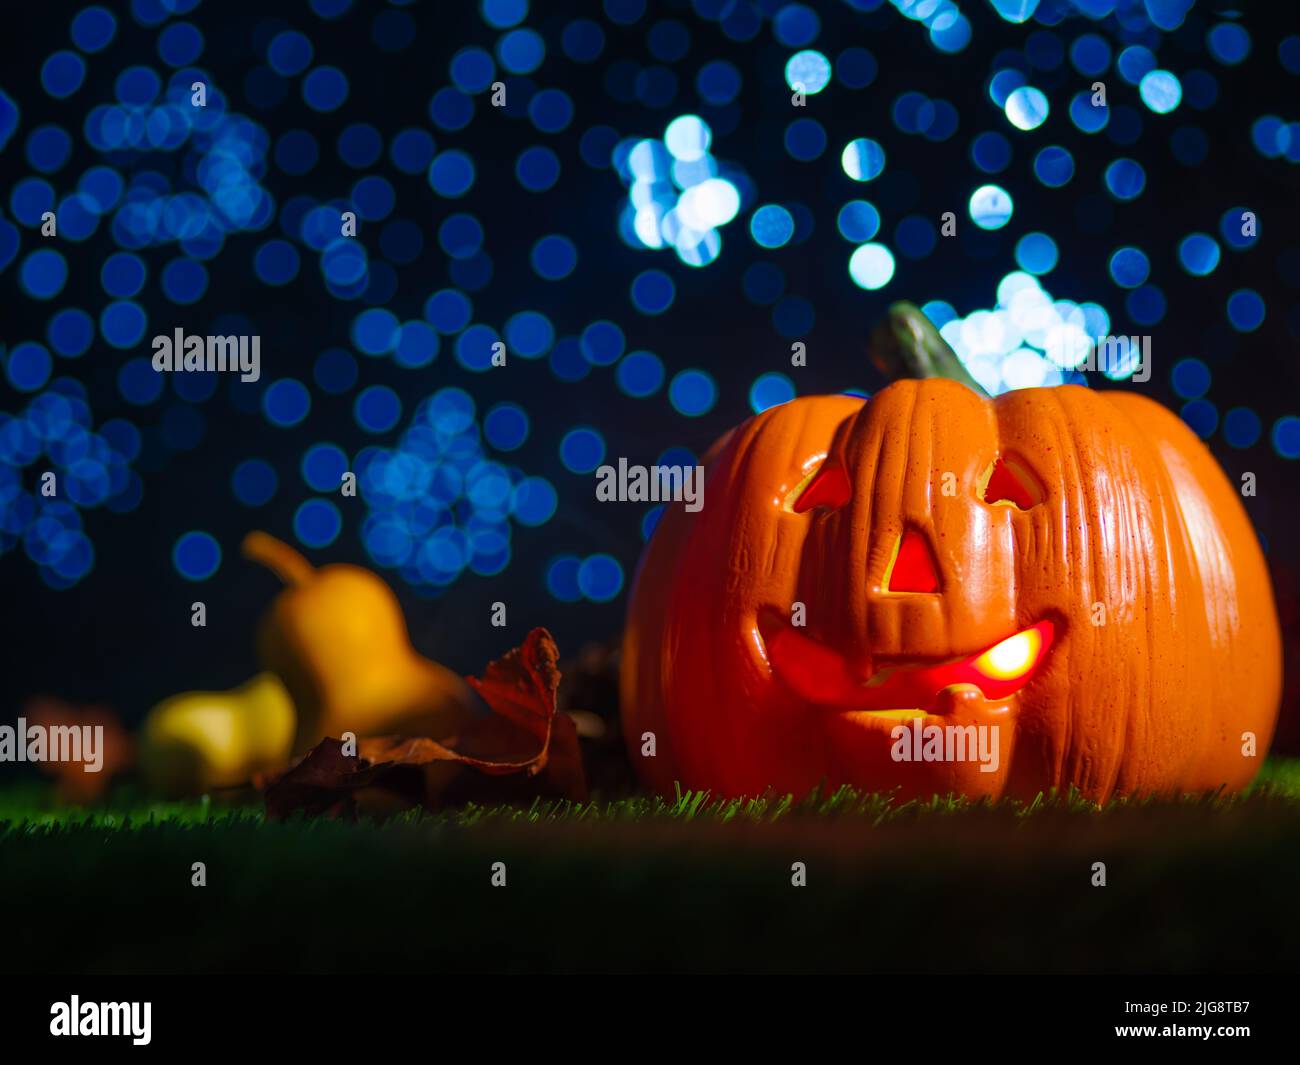 Against the backdrop of a blue starry sky Halloween composition. A large orange pumpkin with a carved face, a smile, illuminated from the inside on a Stock Photo